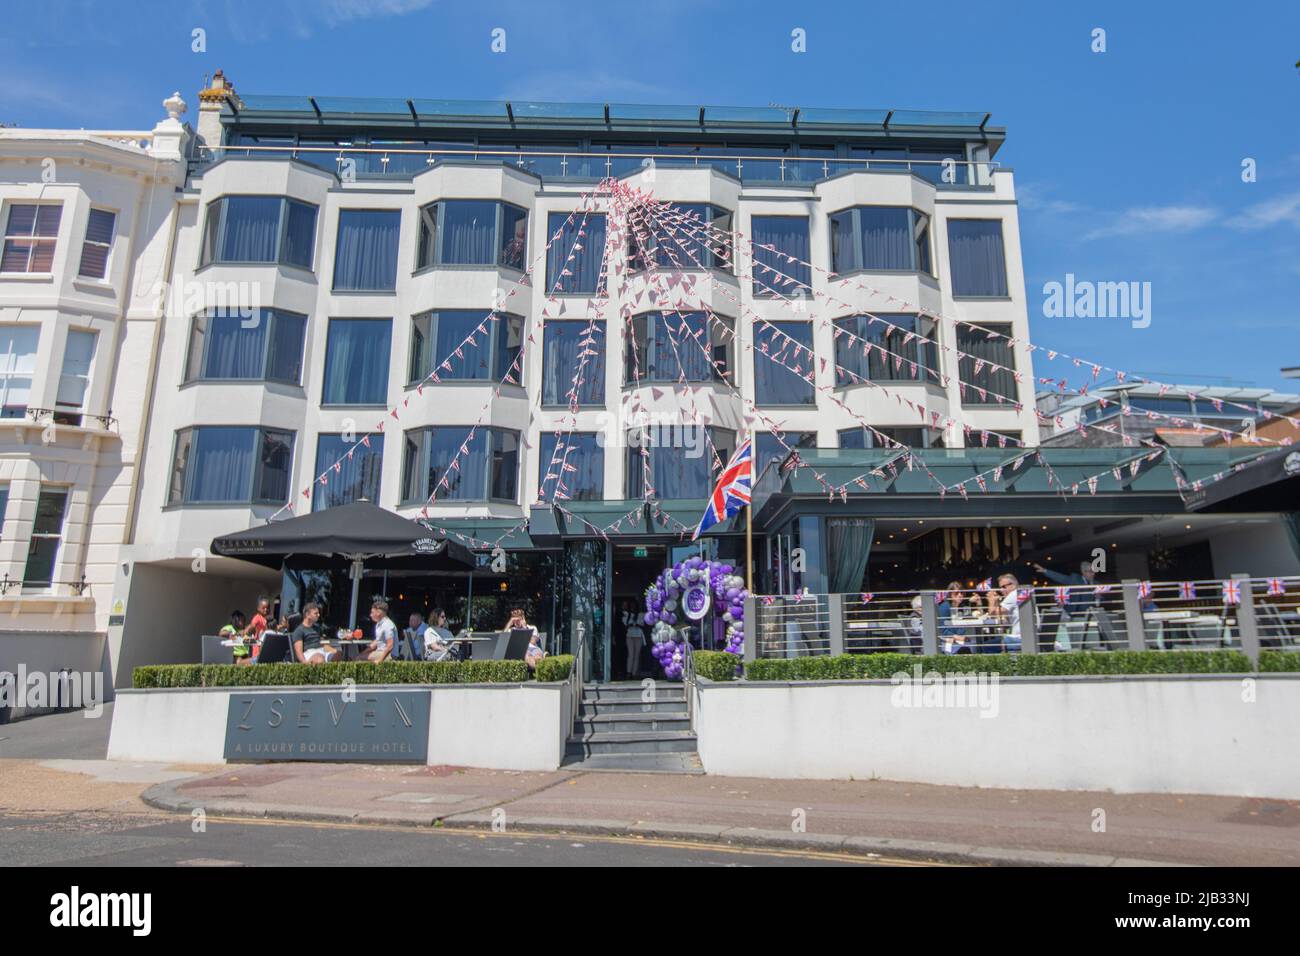 Southend on sea, UK. 2nd June, 2022. 7 Seven Hotel display in Southend. Scenes around Southend on Sea as people celebrate the Queens Platinum Jubilee and the bank holiday. Penelope Barritt/Alamy Live News Stock Photo